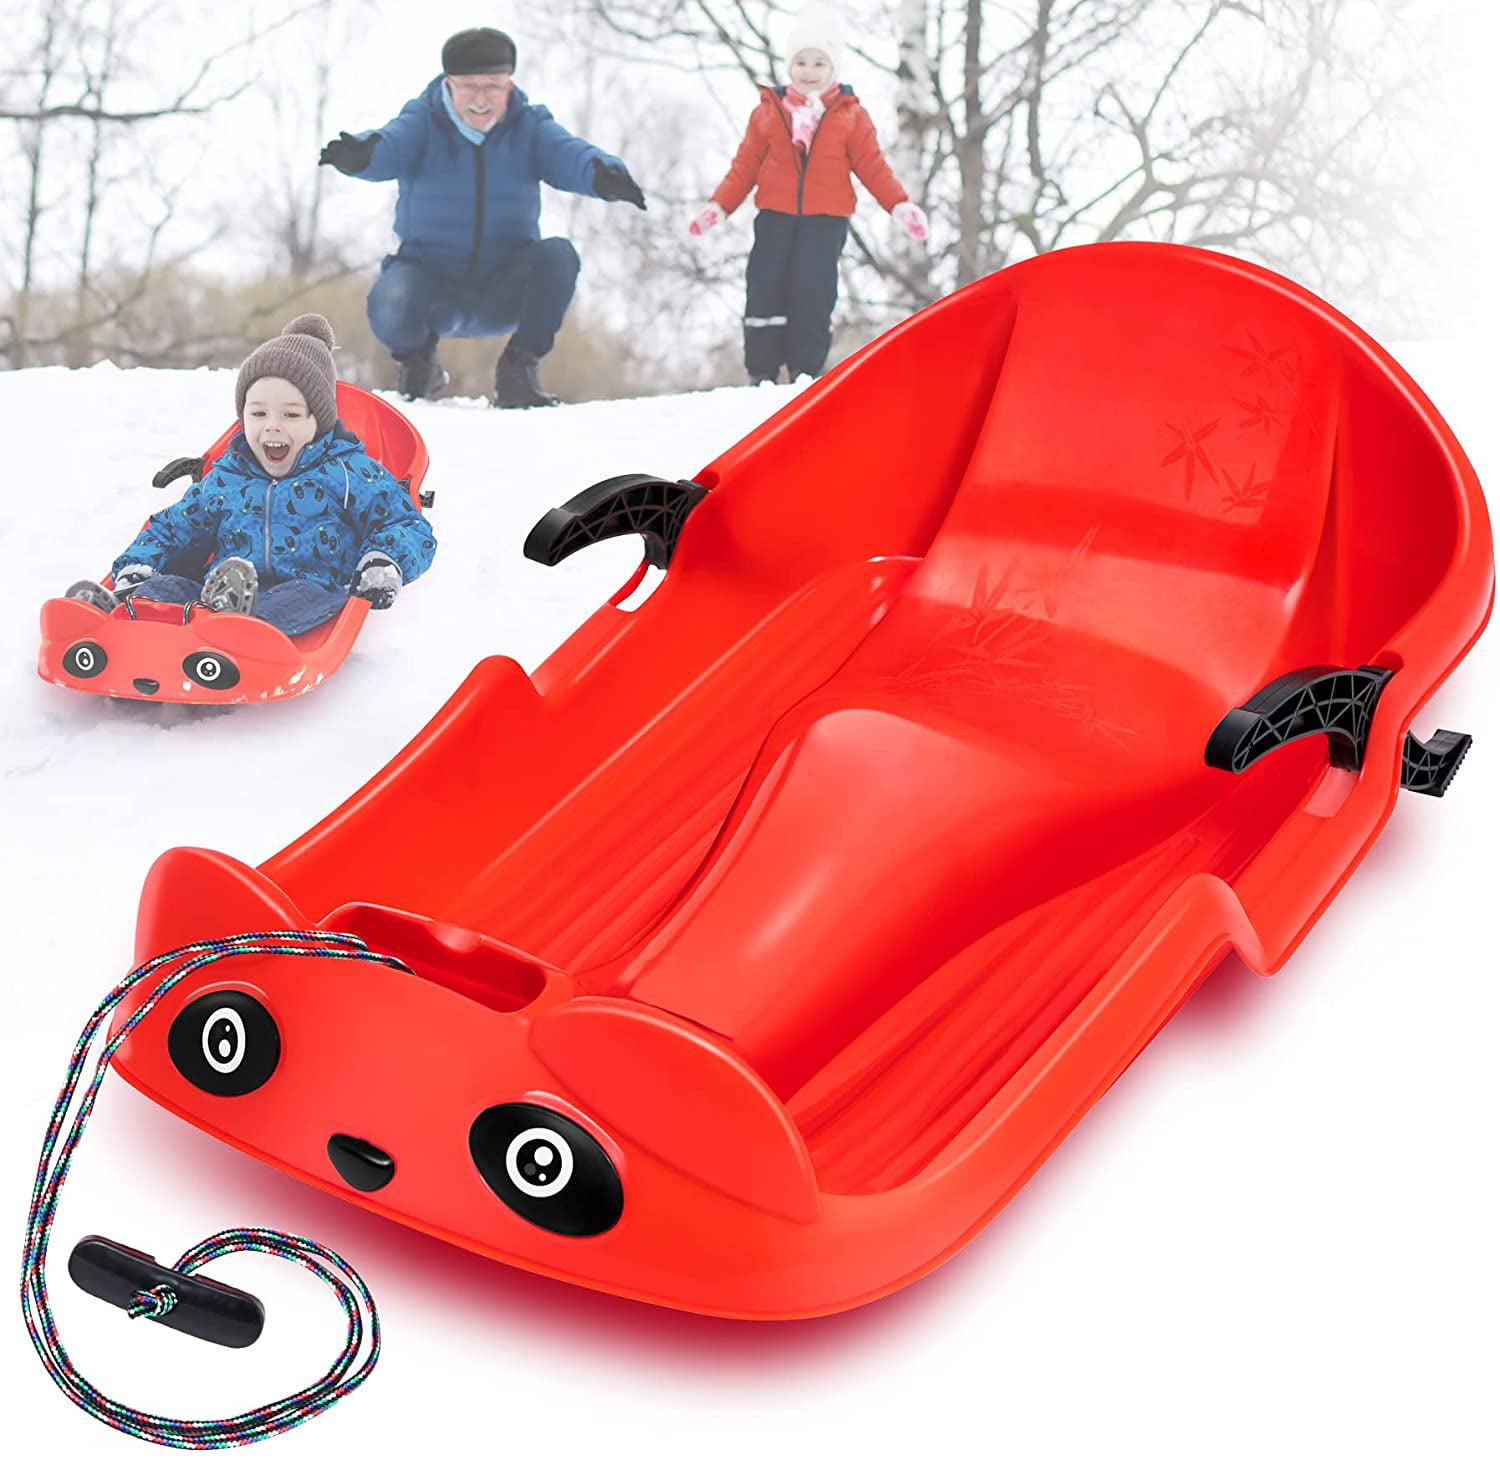 opdtiy Snow Sled Board Downhill Sled Winter Outdoor,Cold Resistant Skiing Boards Snow Grass Sand Board Ski Pad for Kids Suitable for Winter Snow Sleds Saucer Sled Lightweight Flexible